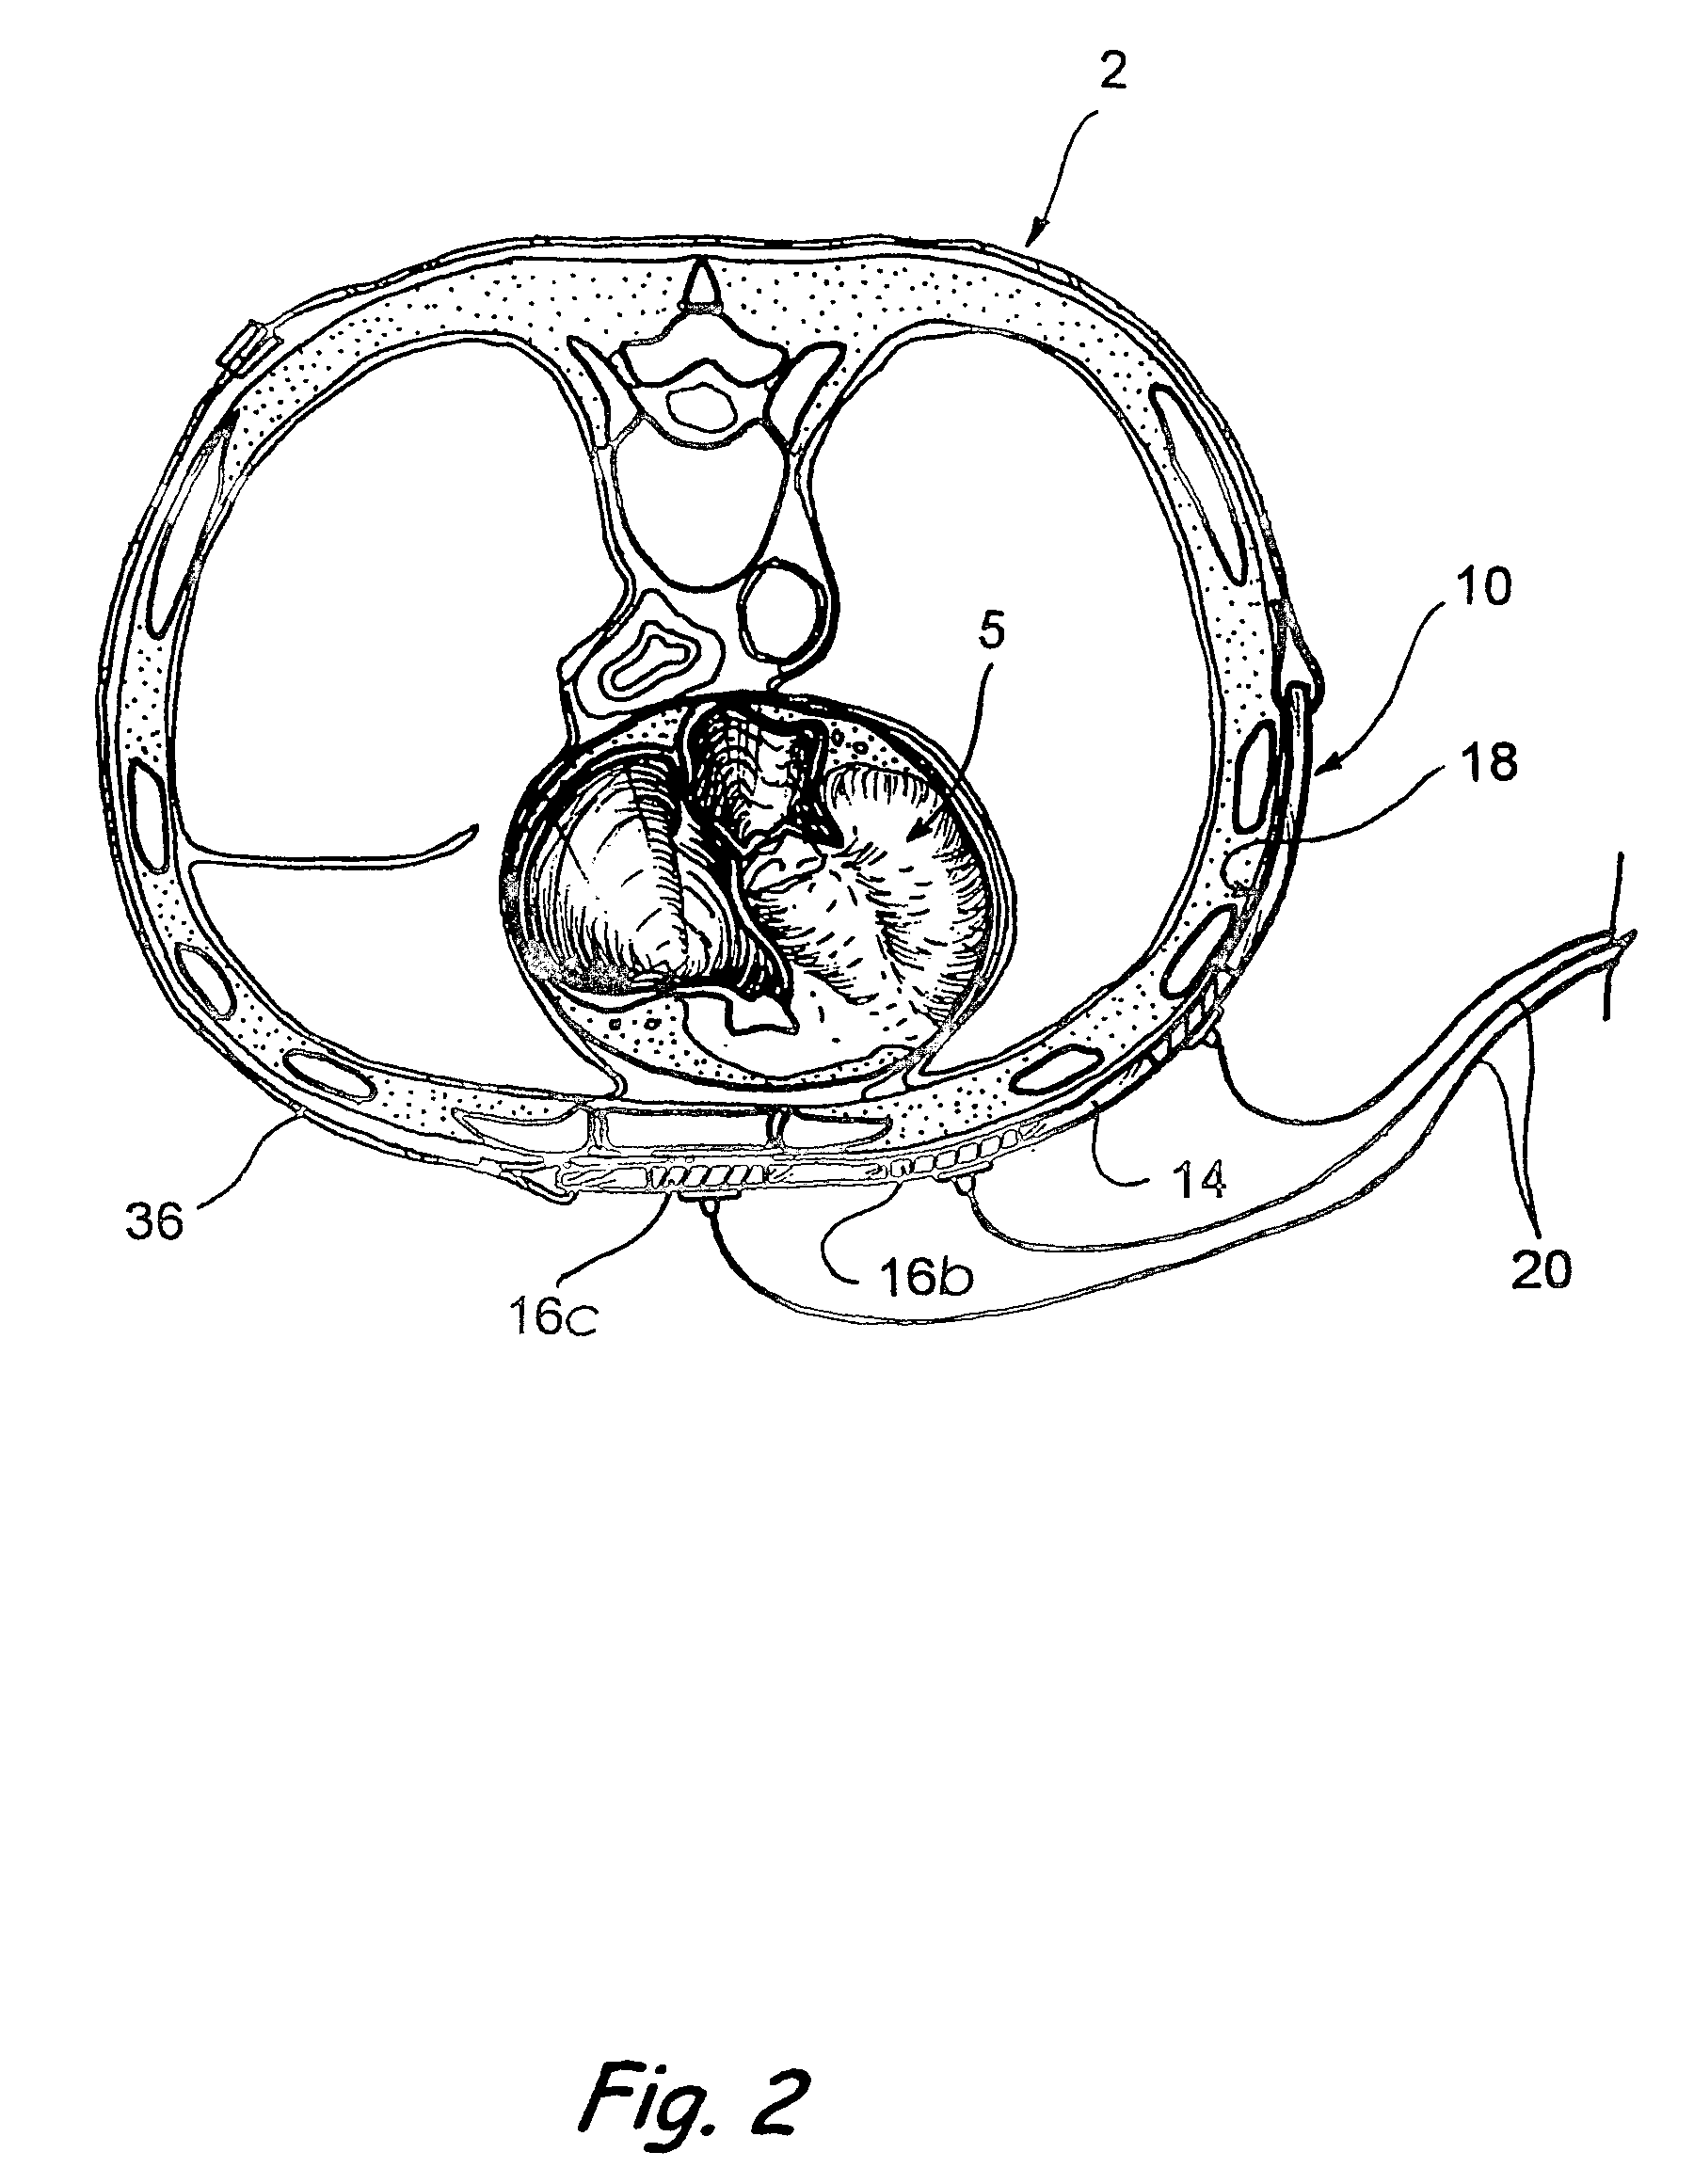 Ultrasound devices and methods for treating ischemia and other cardiovascular disorders